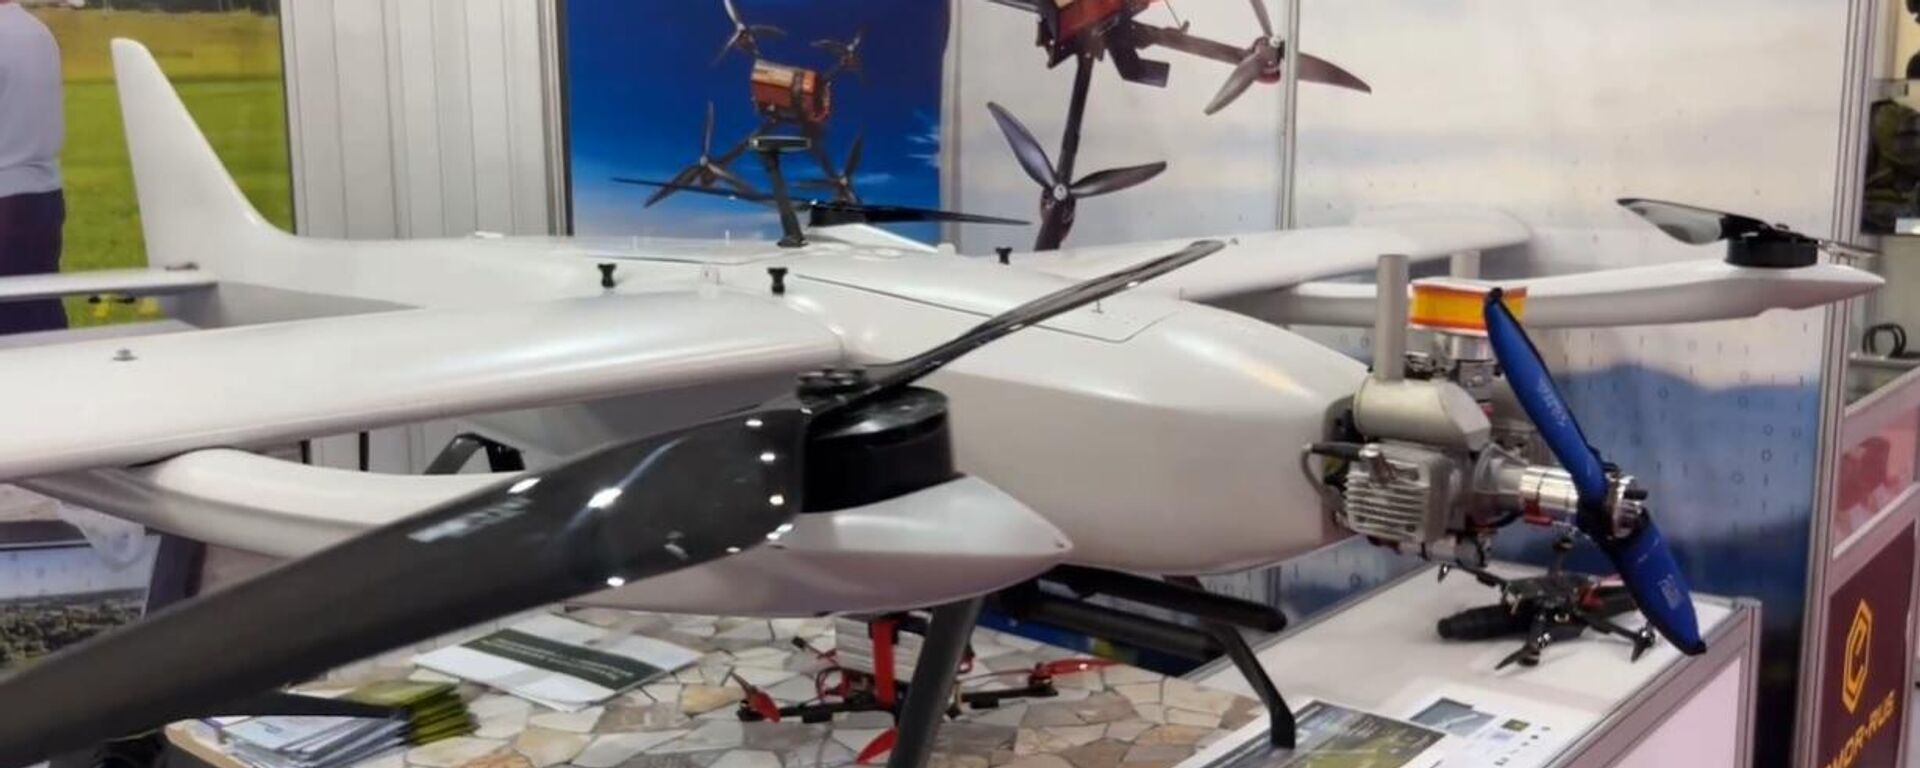 Russia Unveils Cutting-Edge UAV Fitted With Neural Network-Based Object Identification System - Sputnik International, 1920, 15.08.2023